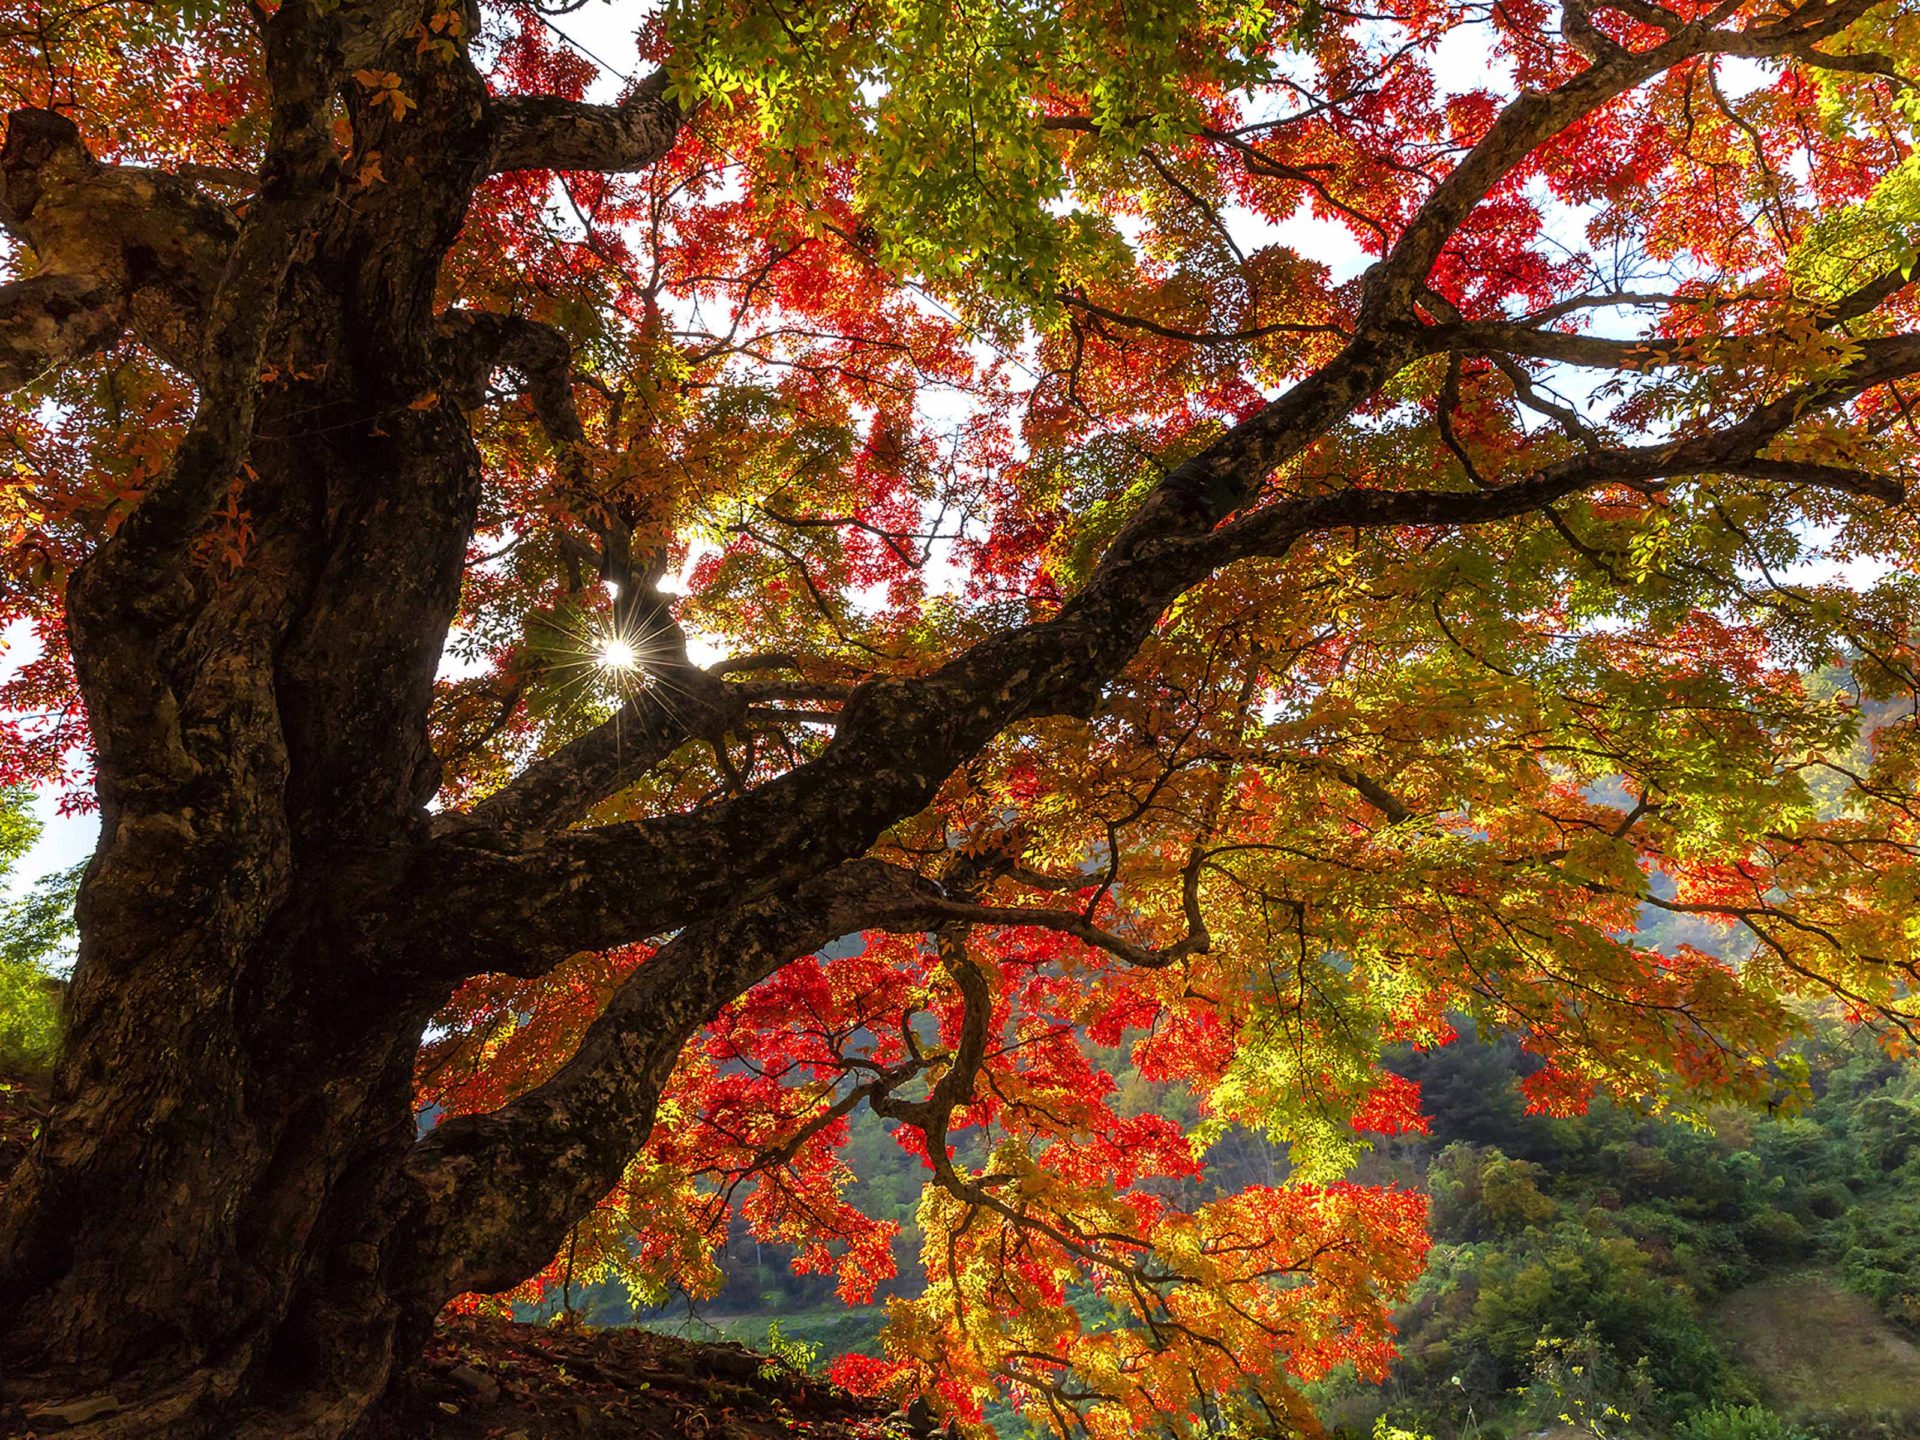 Landscapes Photography Autumn Old Wood Red Leaves Inje South Korea Desktop HD Wallpaper For Pc Tablet And Mobile, Wallpaper13.com